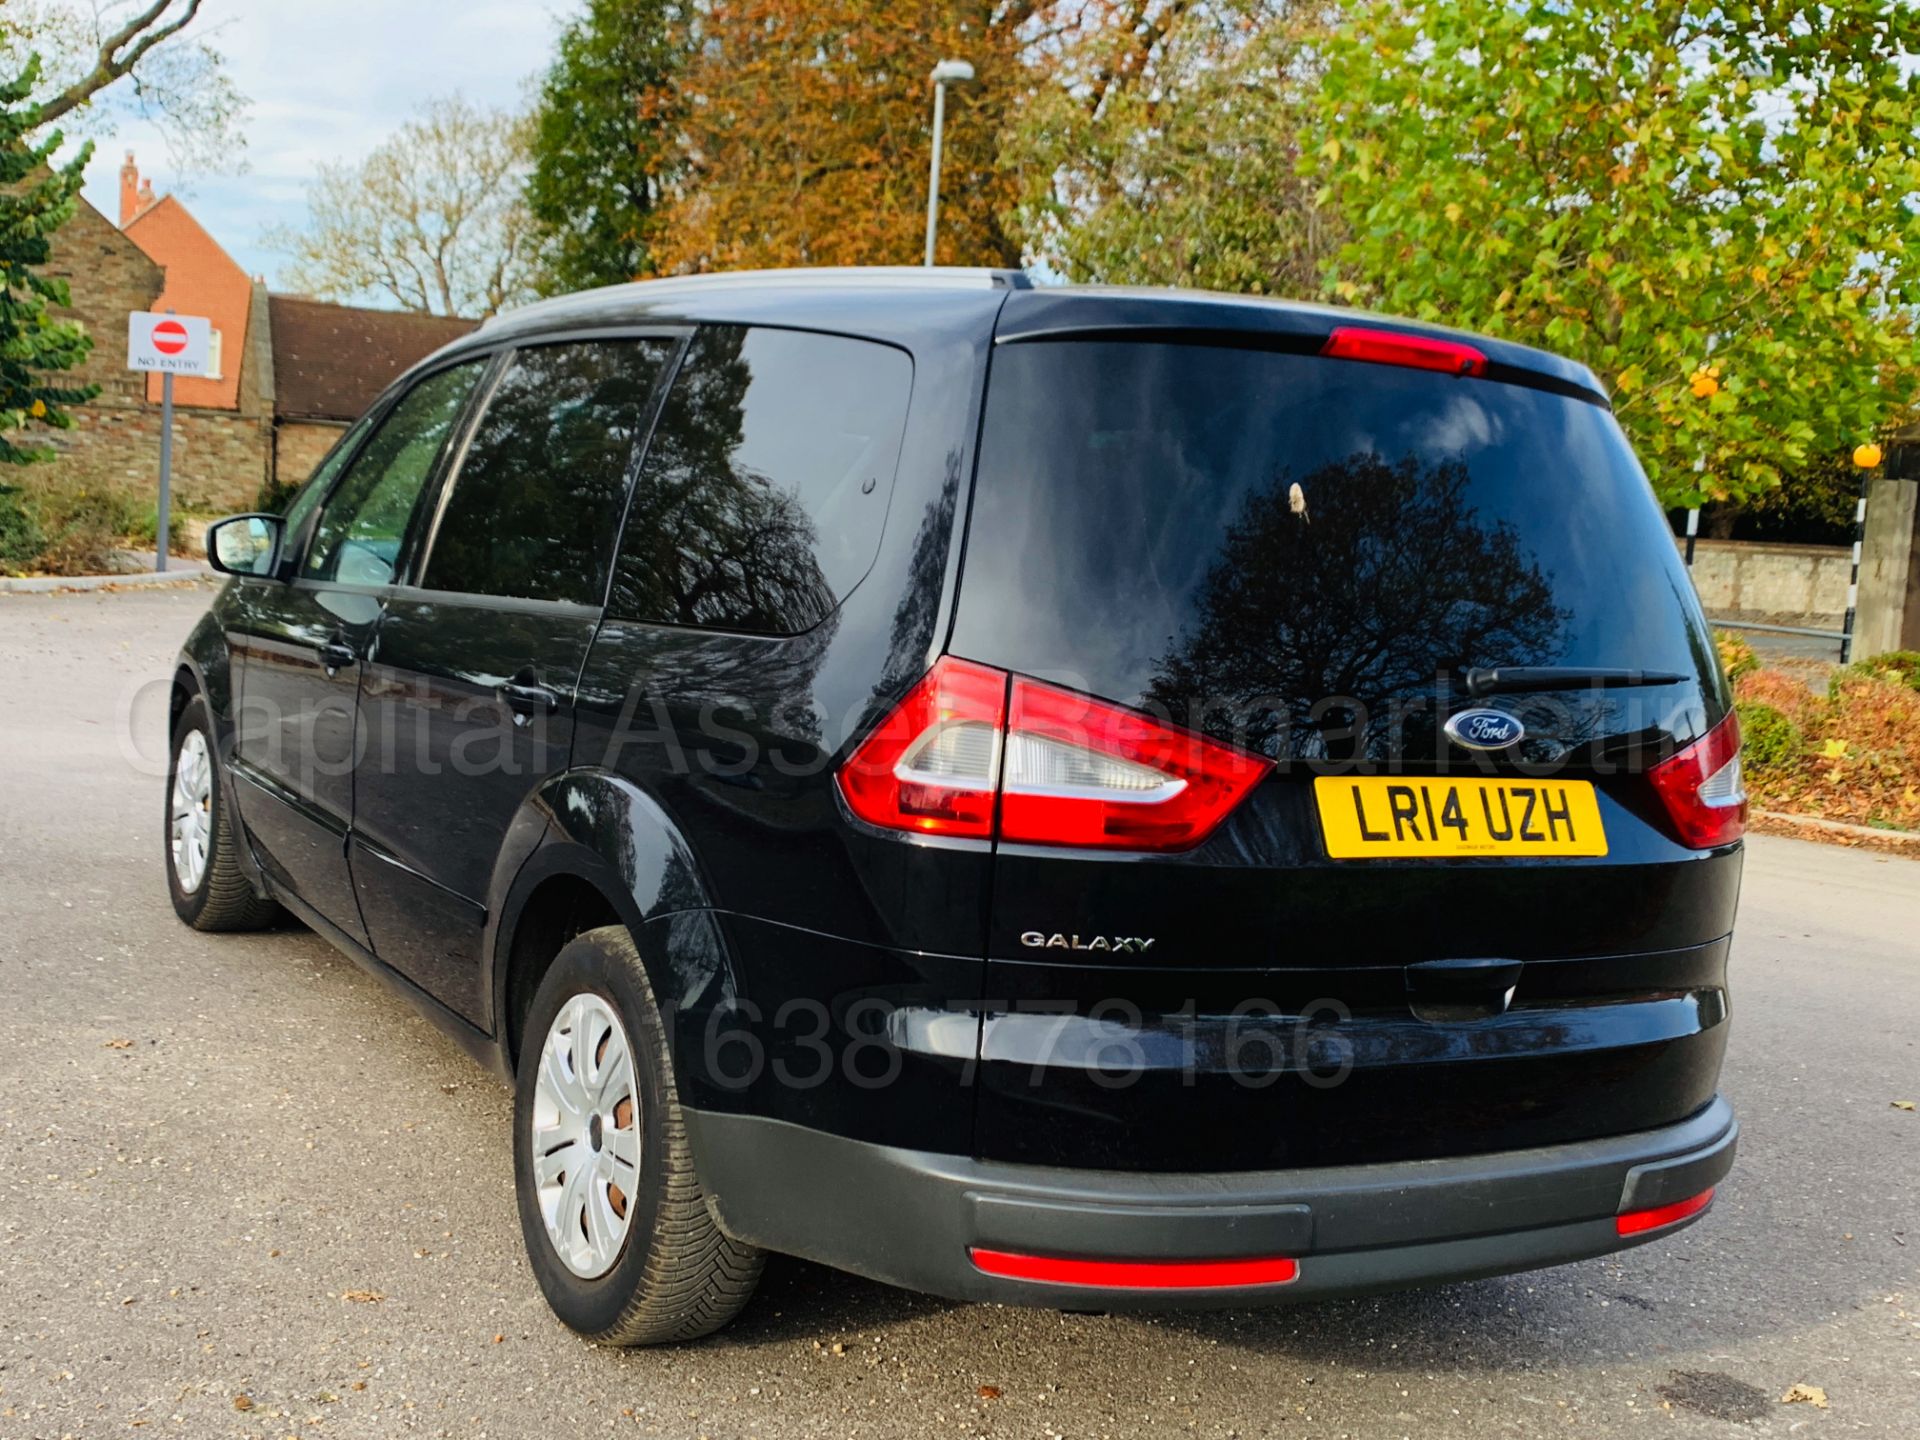 FORD GALAXY **ZETEC** 7 SEATER MPV (2014) 2.0 TDCI - 140 BHP - AUTO POWER SHIFT (1 OWNER) - Image 8 of 37